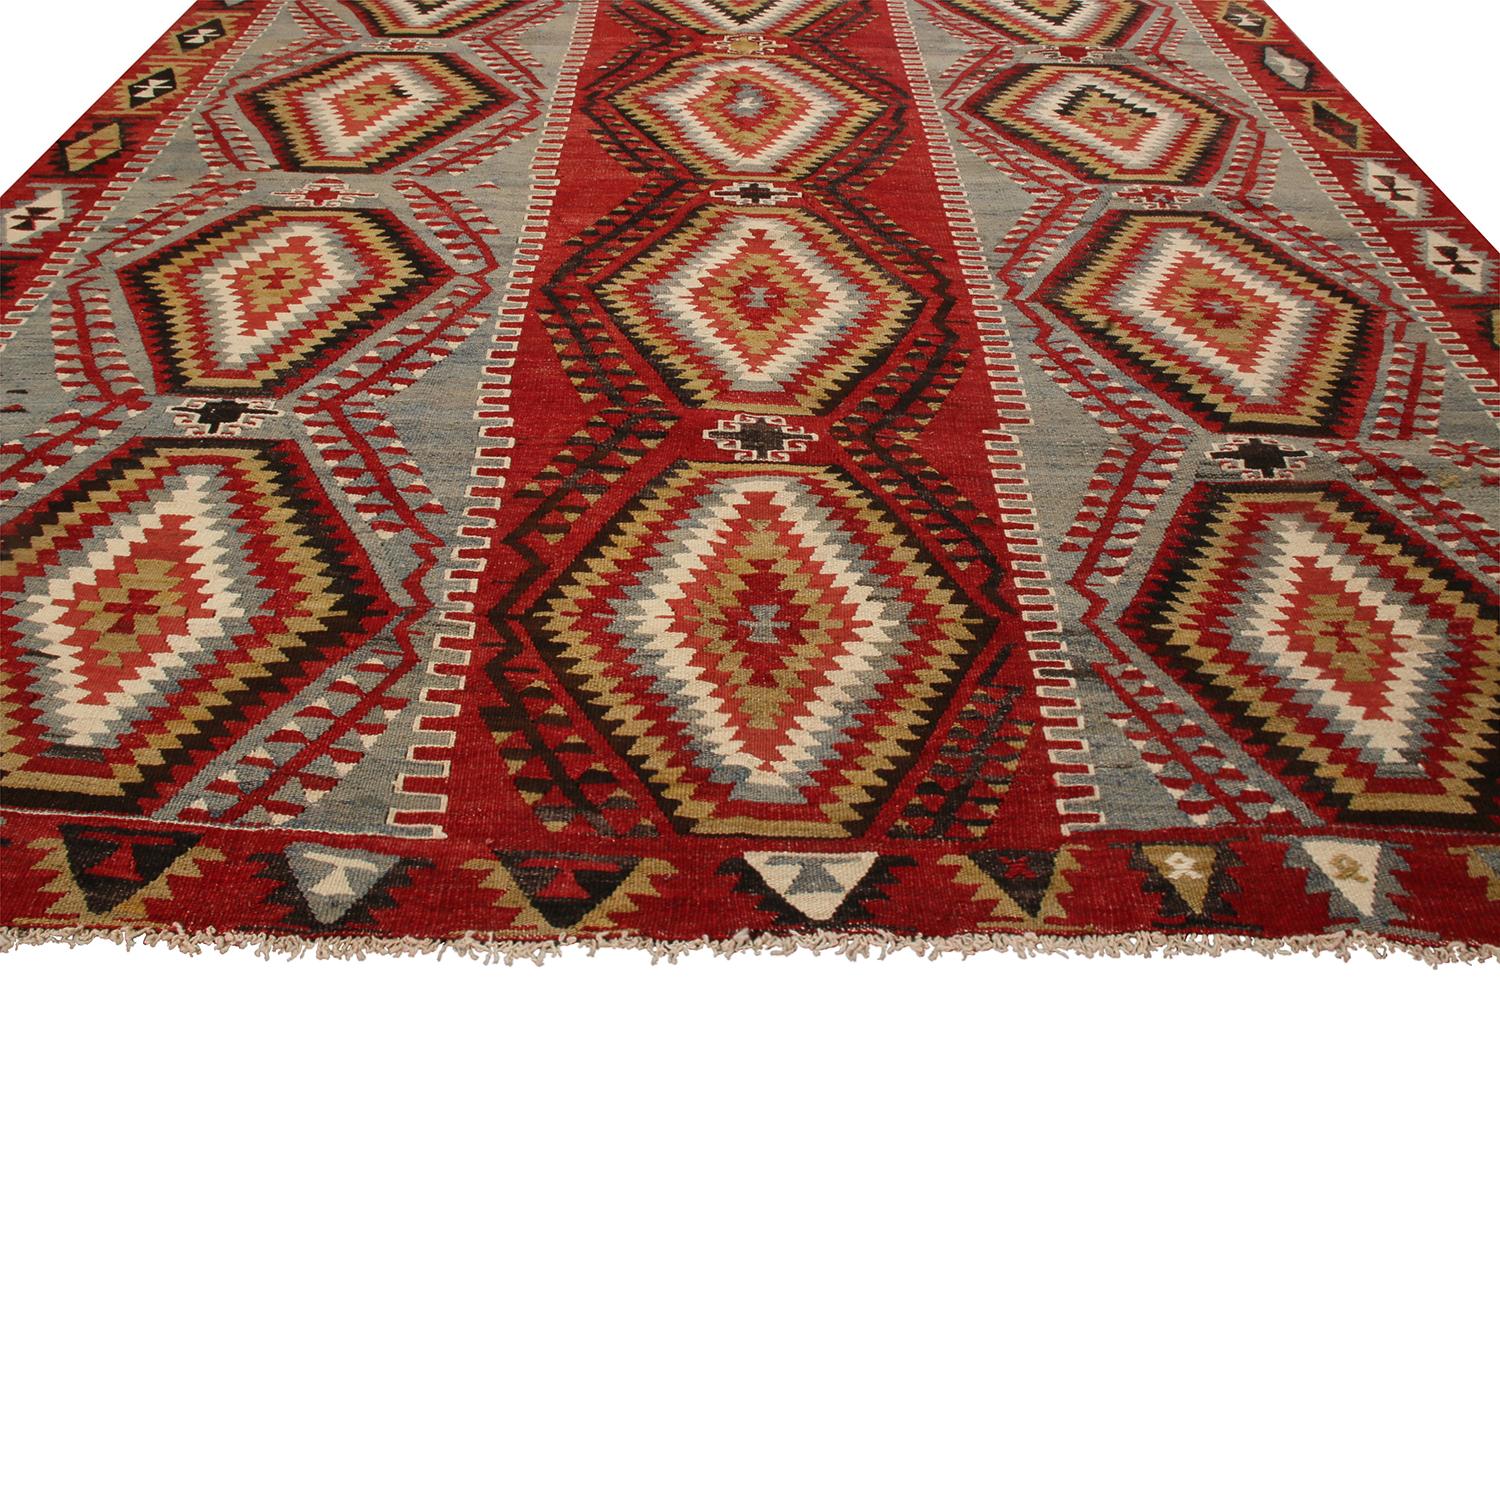 Flat-woven in high-quality wool originating from Turkey between 1930-1940, this vintage Esme Kilim rug hosts one of the more uncommon, individualistic arrays of colorways among its era, balancing an accenting presence of rich red and black with